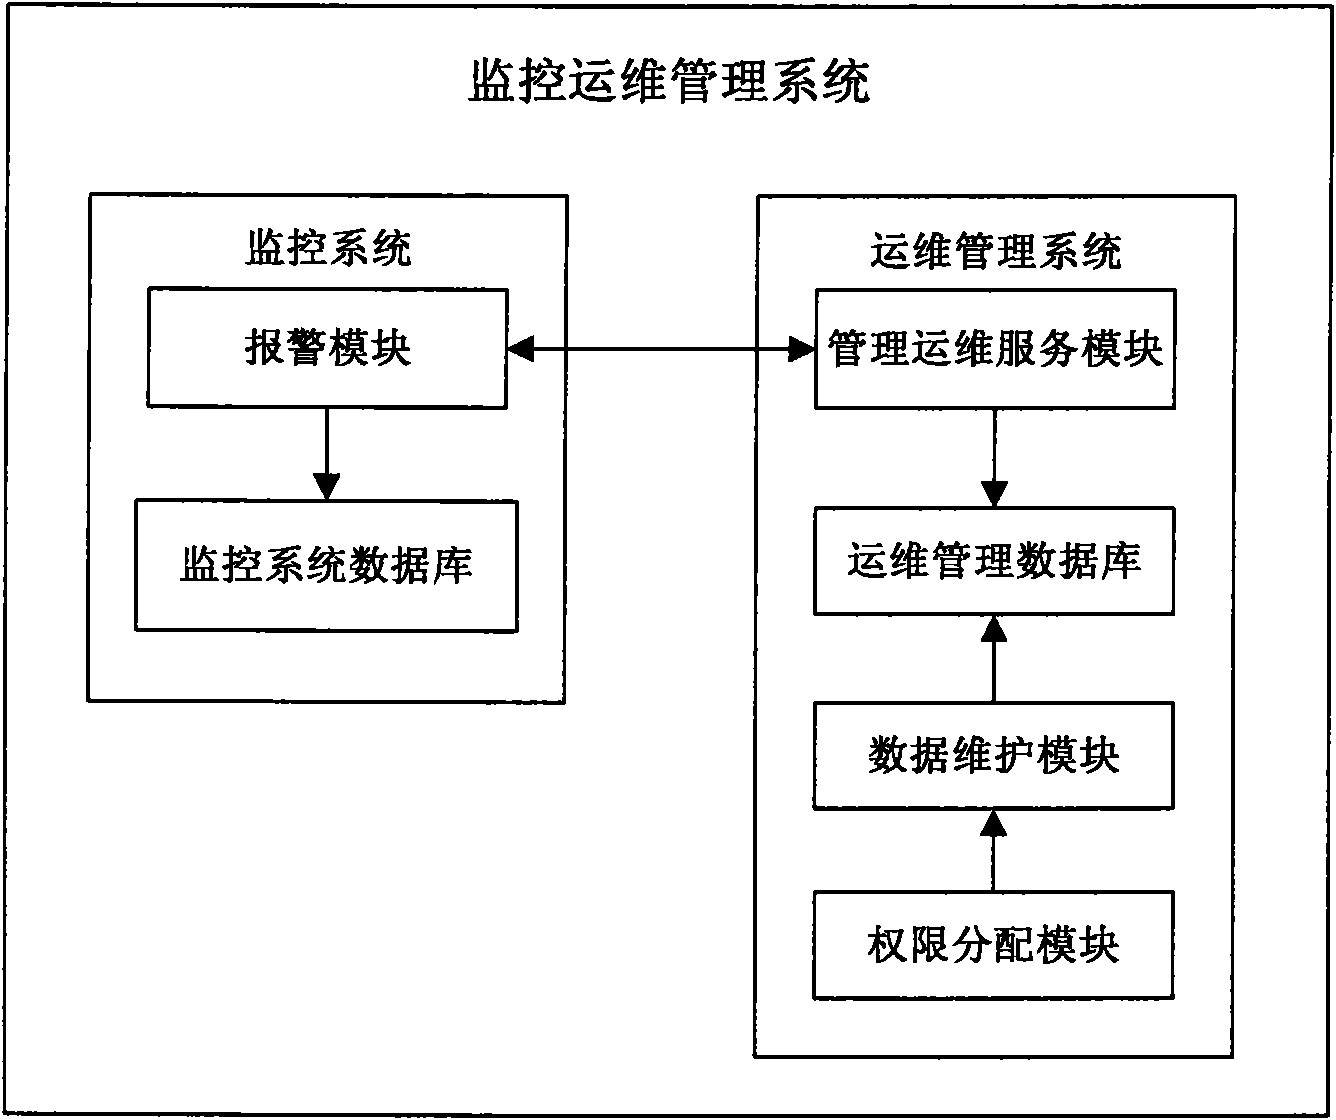 Monitoring and operation managing system